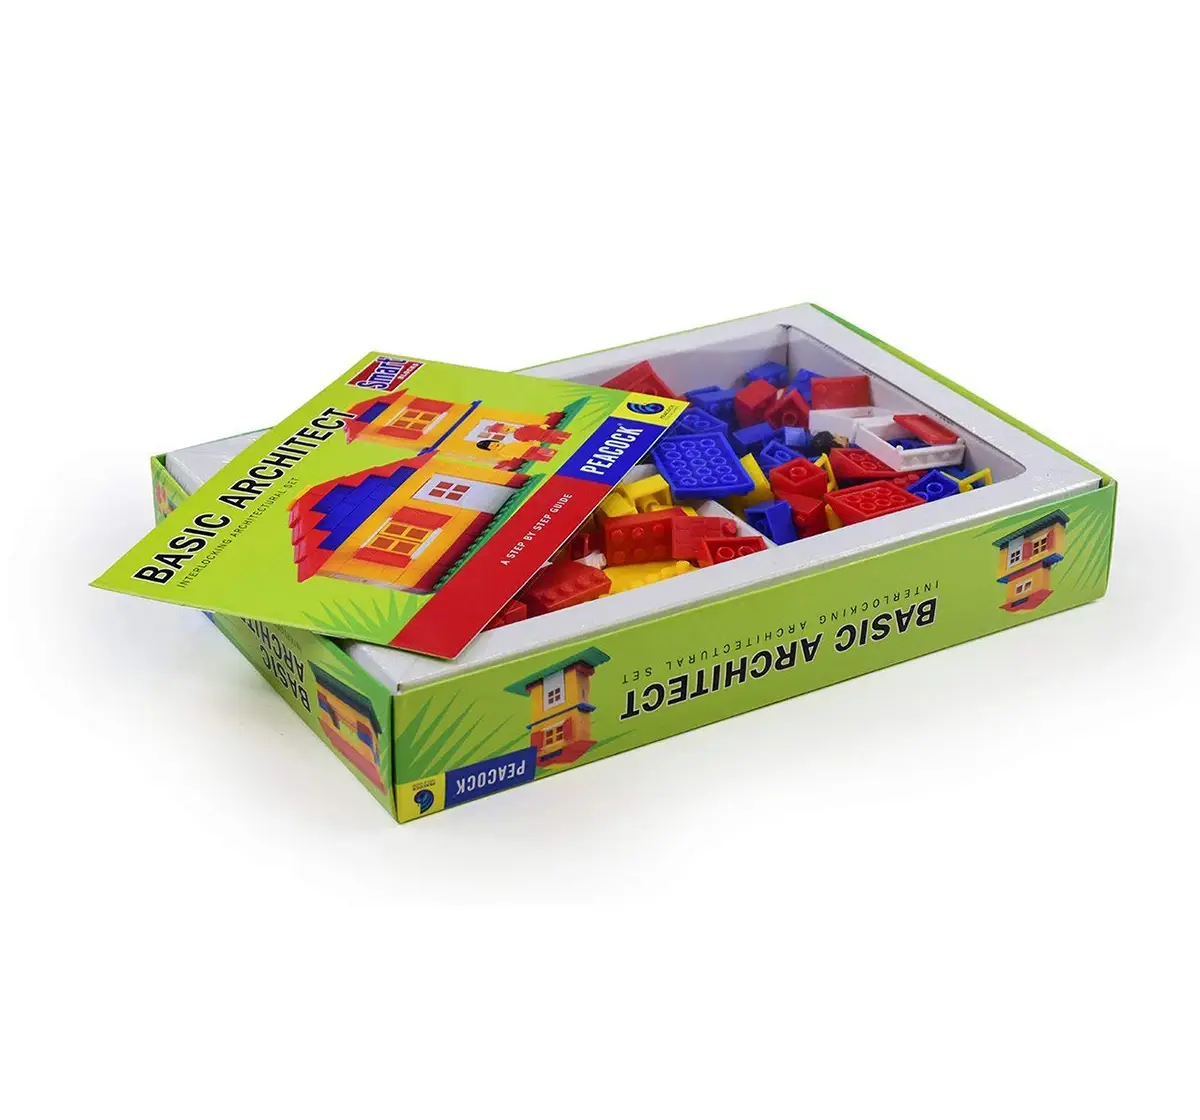 Peacock  Basic Architect Generic Blocks for Kids age 4Y+ 